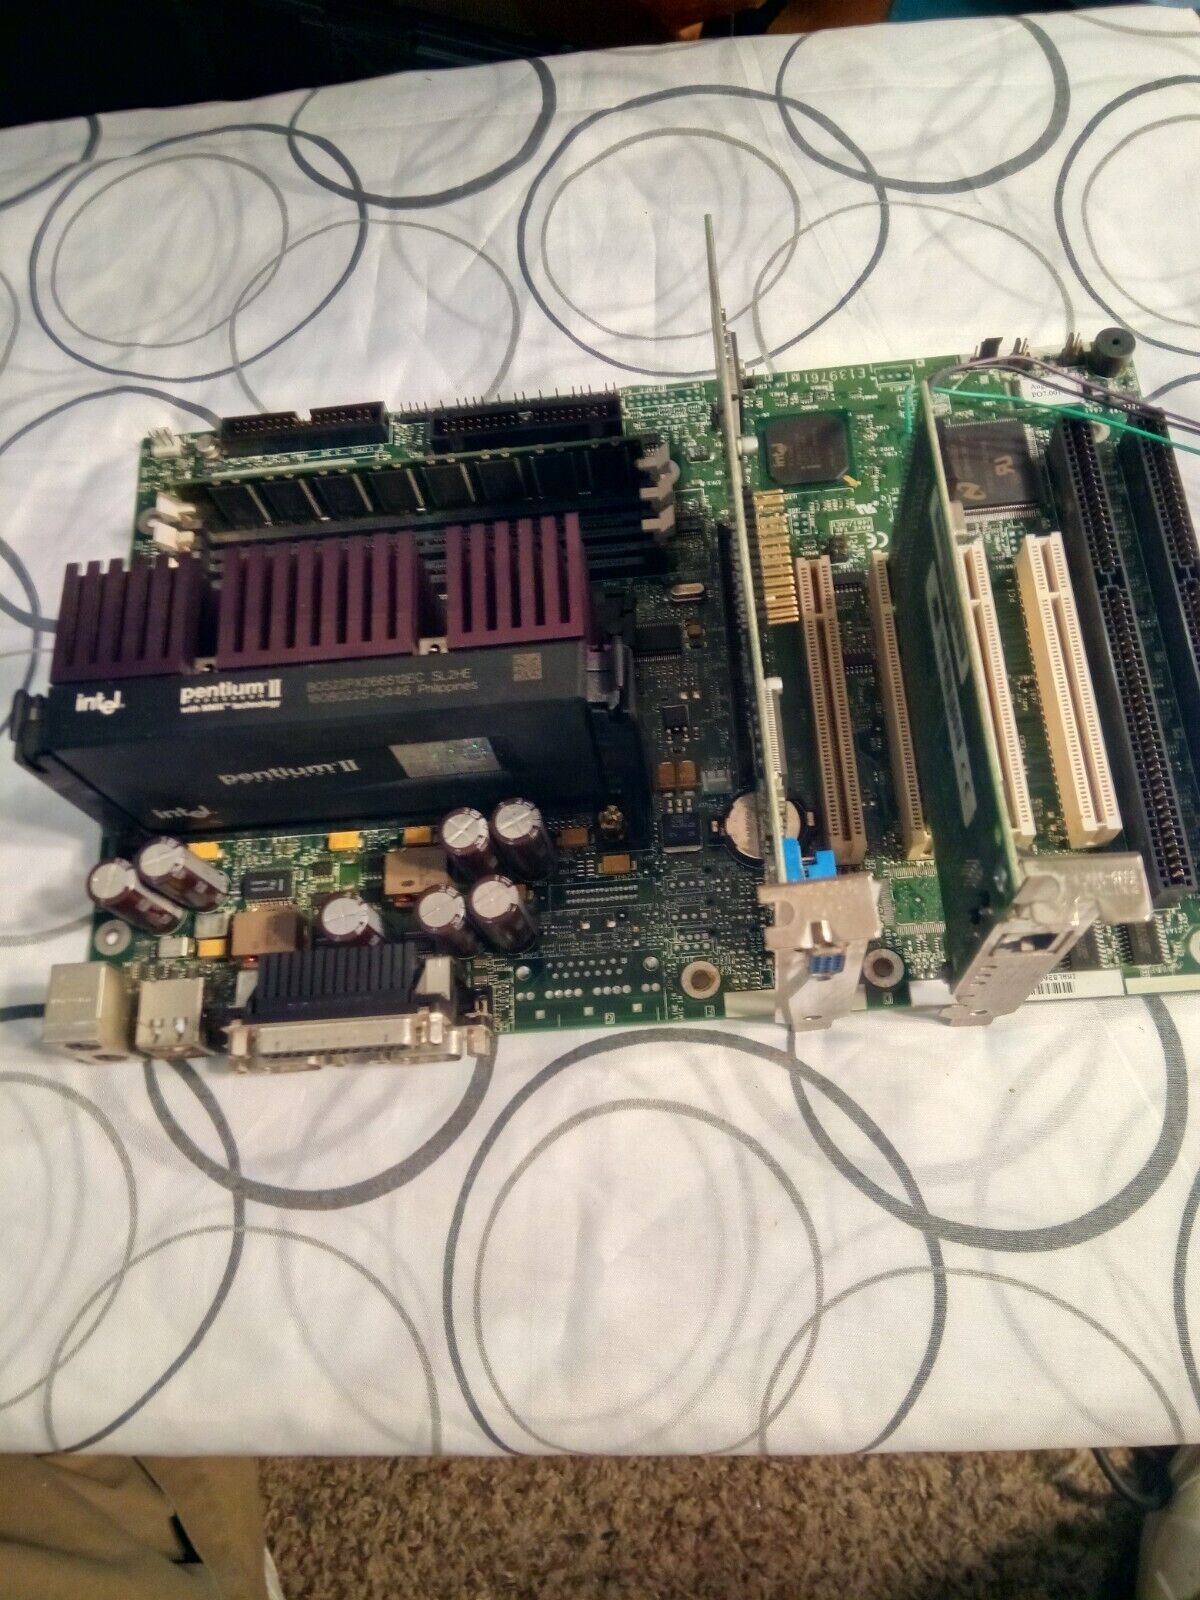 INTEL AL440LX ,681537-401 PENTIUM II 266 WITH VIDEO CARD AND NETWORK 